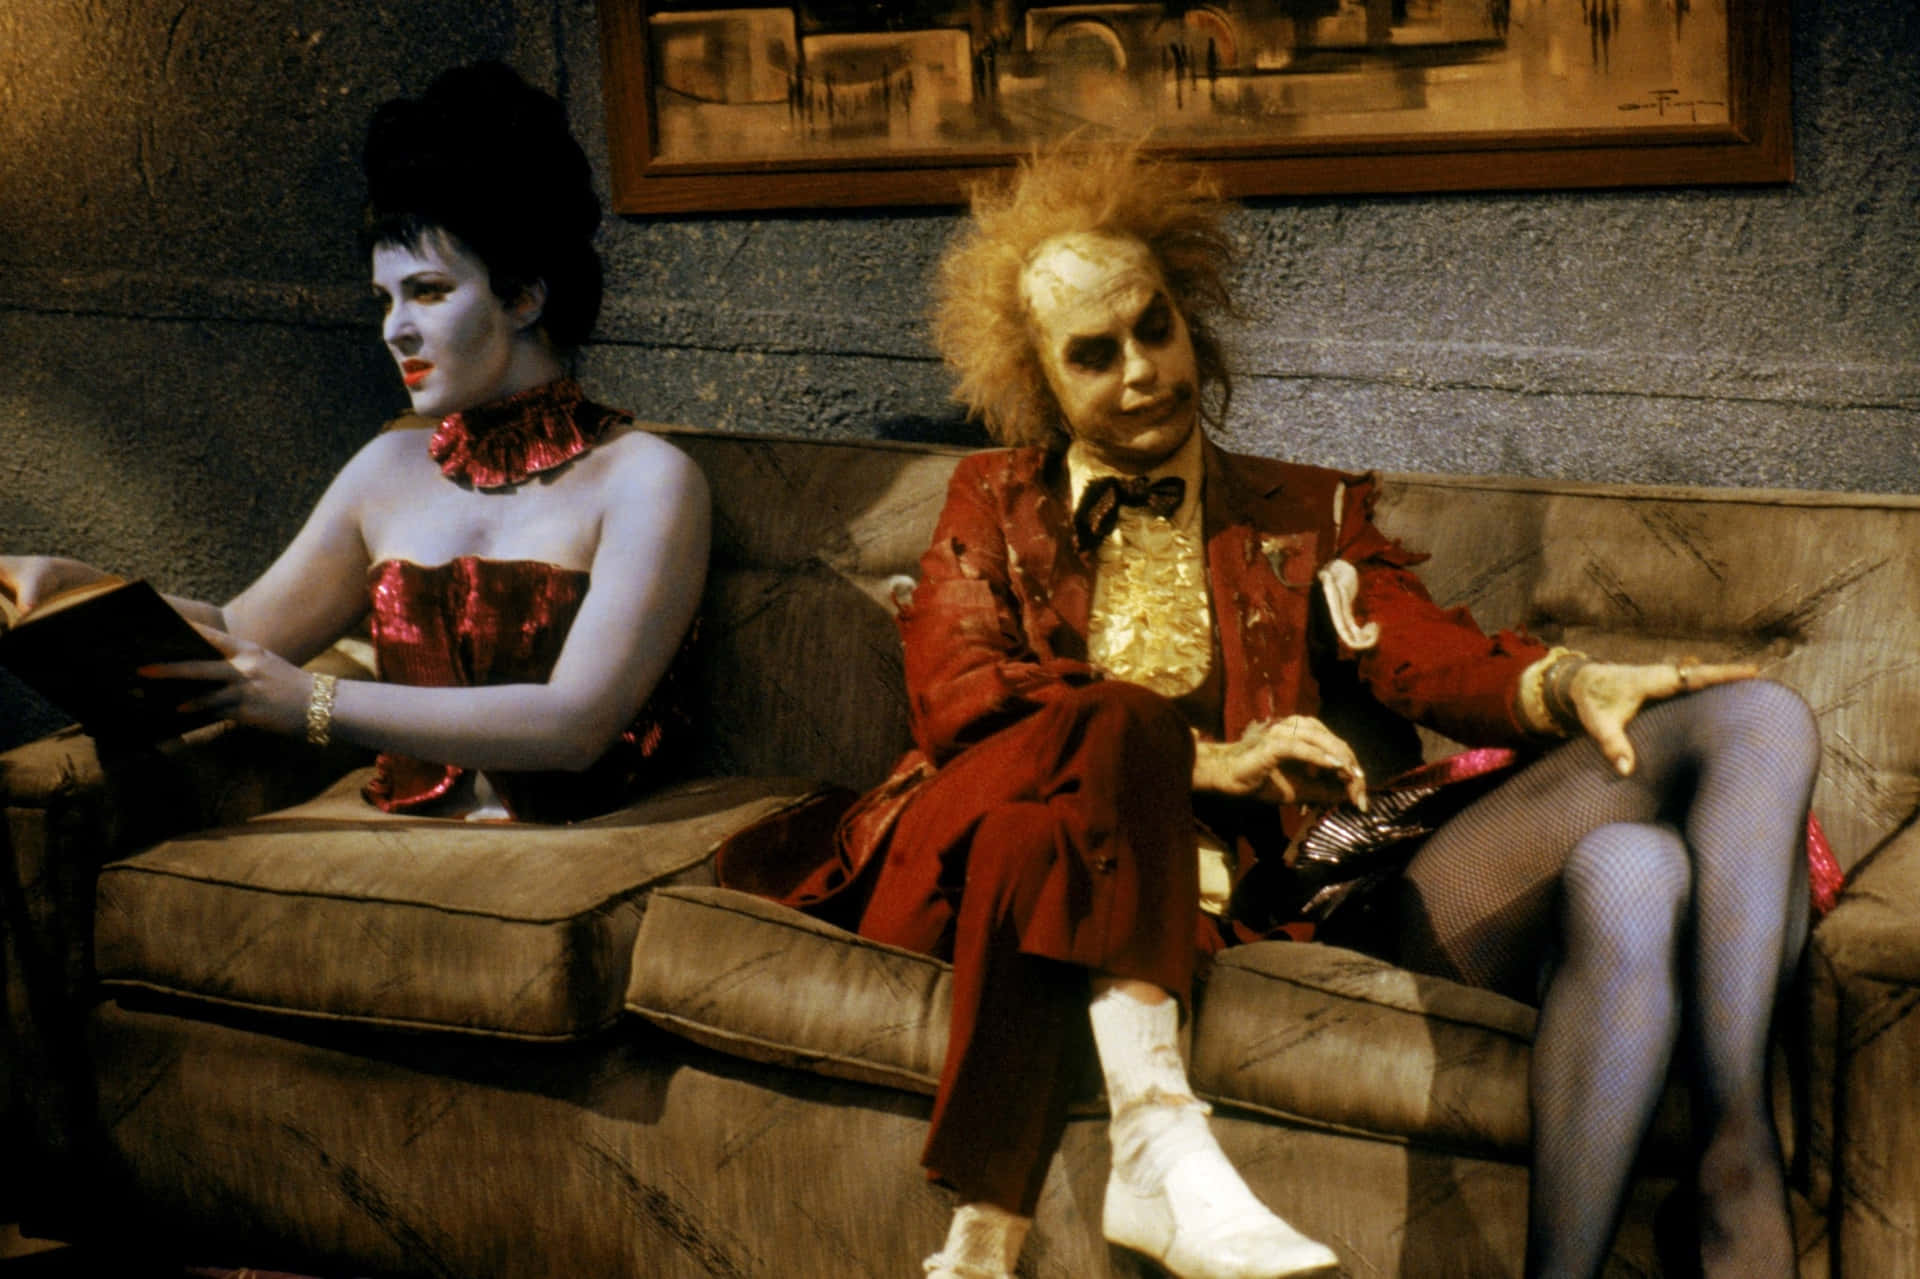 Beetlejuiceand Companionon Couch Wallpaper